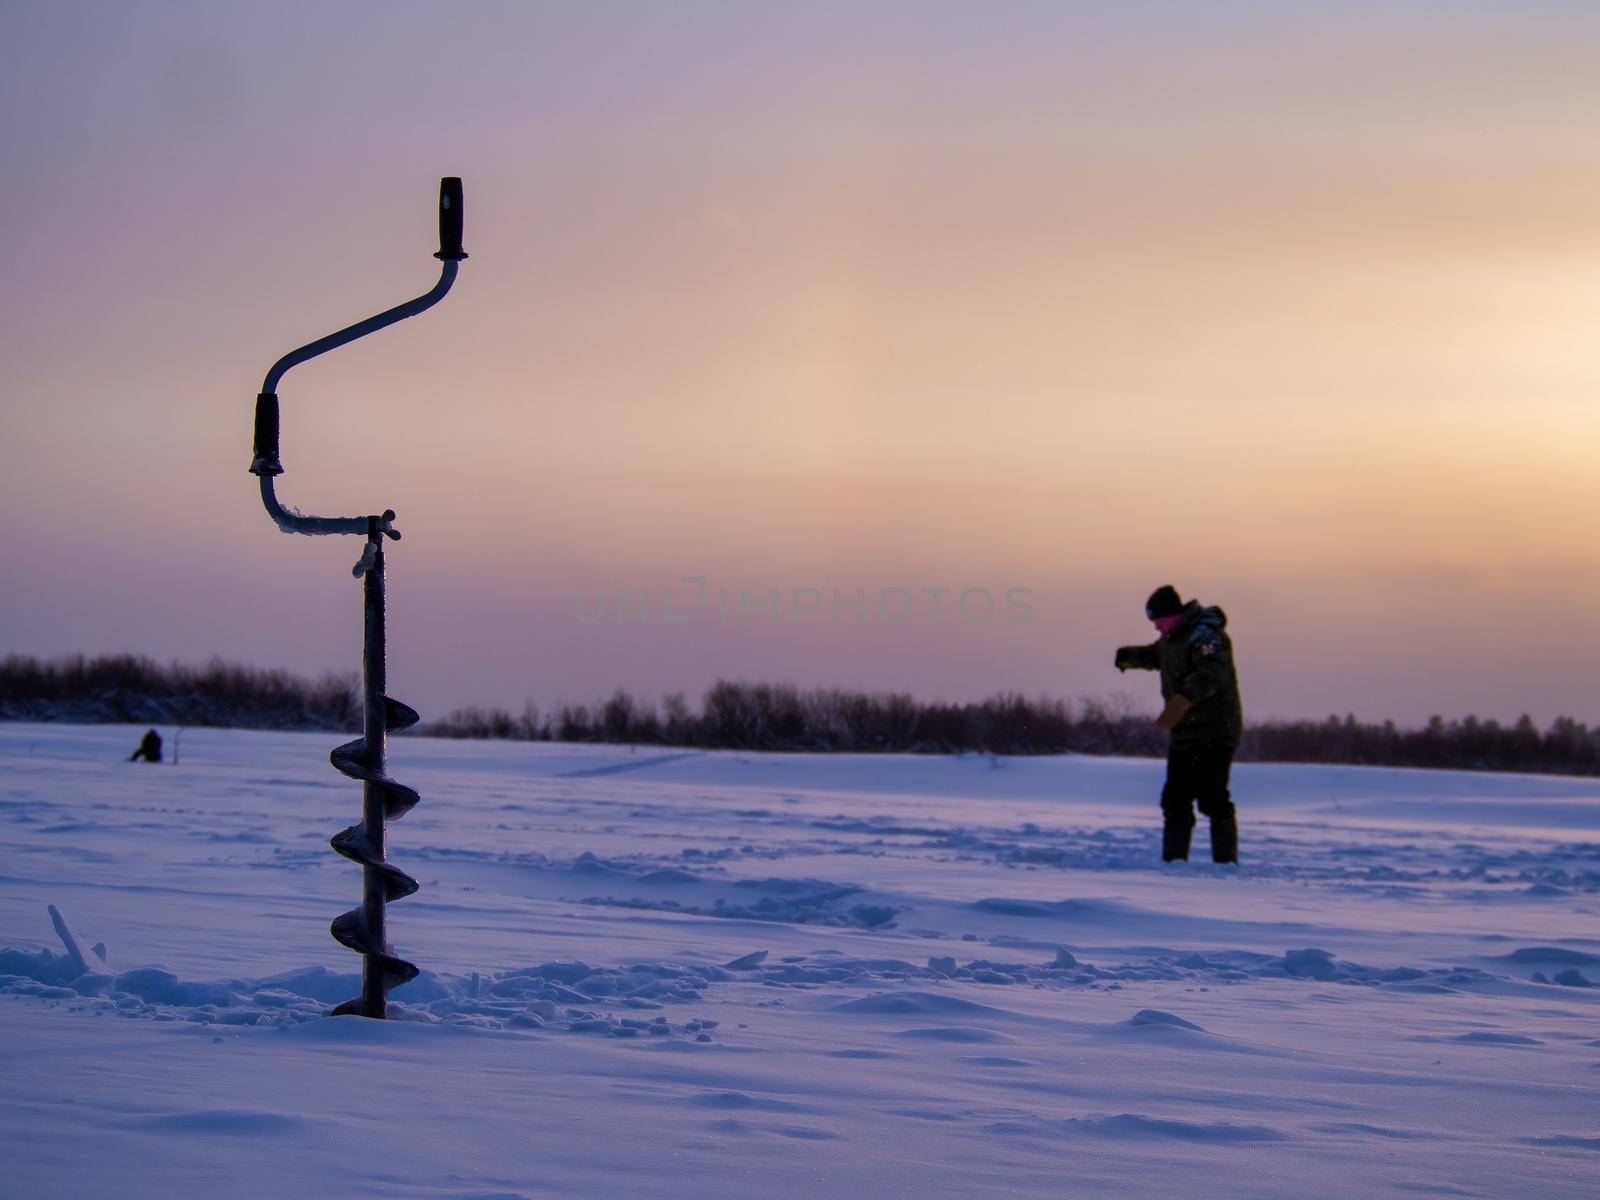 Ice drill on a frozen lake with a fisherman in the background